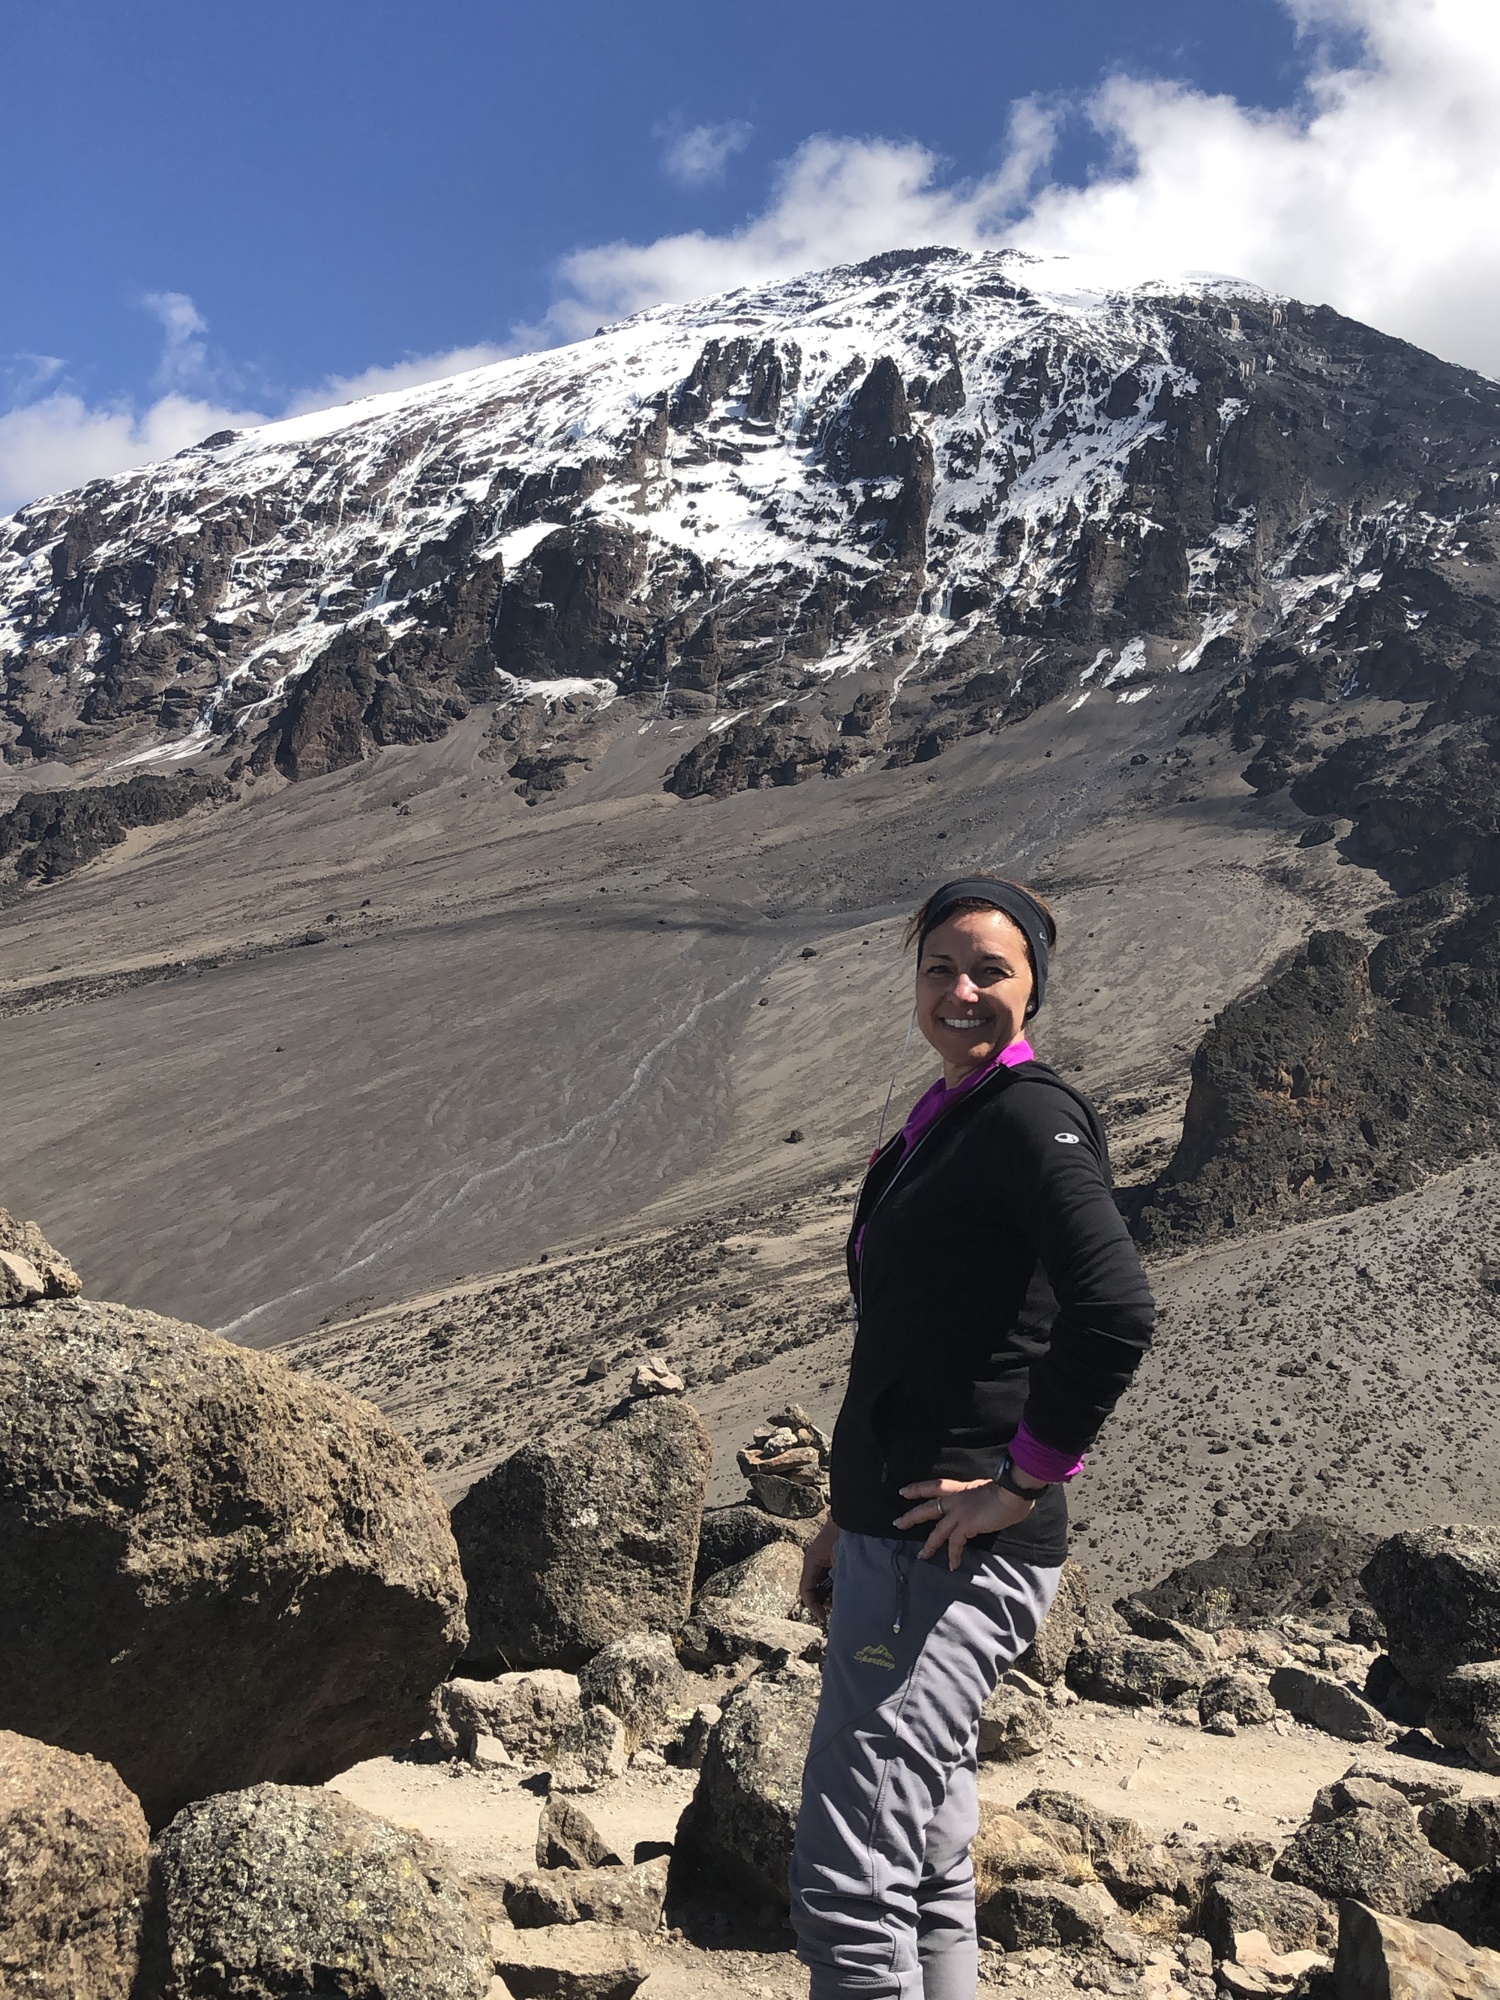 Alice Skaff climbed Mt. Kilimanjaro in October in an effort to raise funds and awareness of Haven of Hope International. Courtesy Alice Skaff